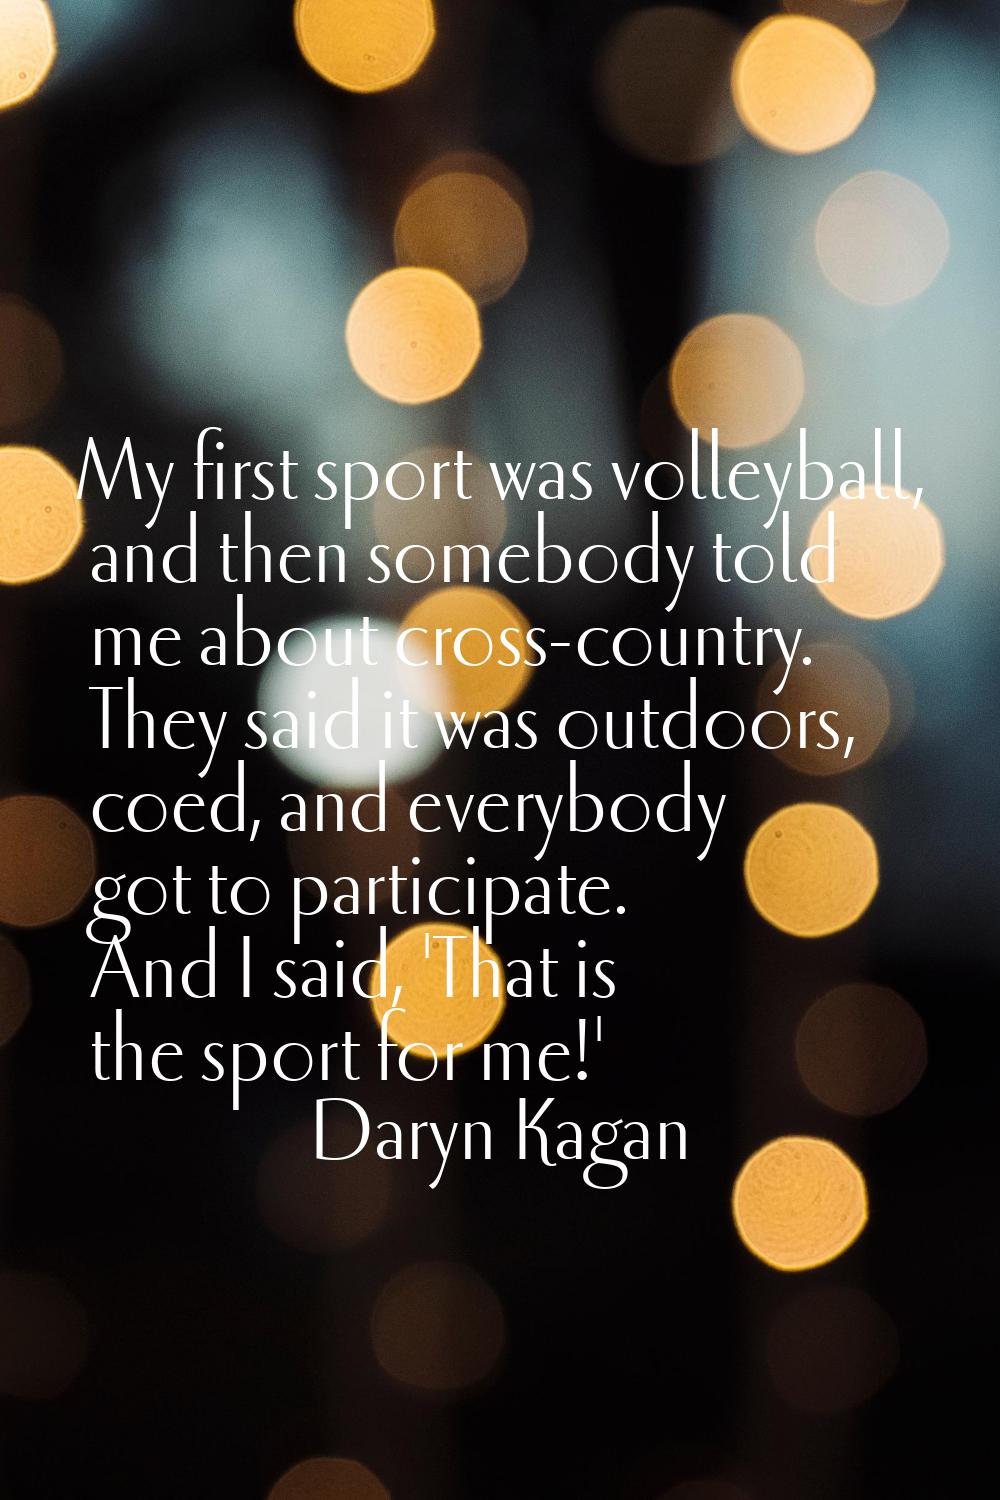 My first sport was volleyball, and then somebody told me about cross-country. They said it was outd